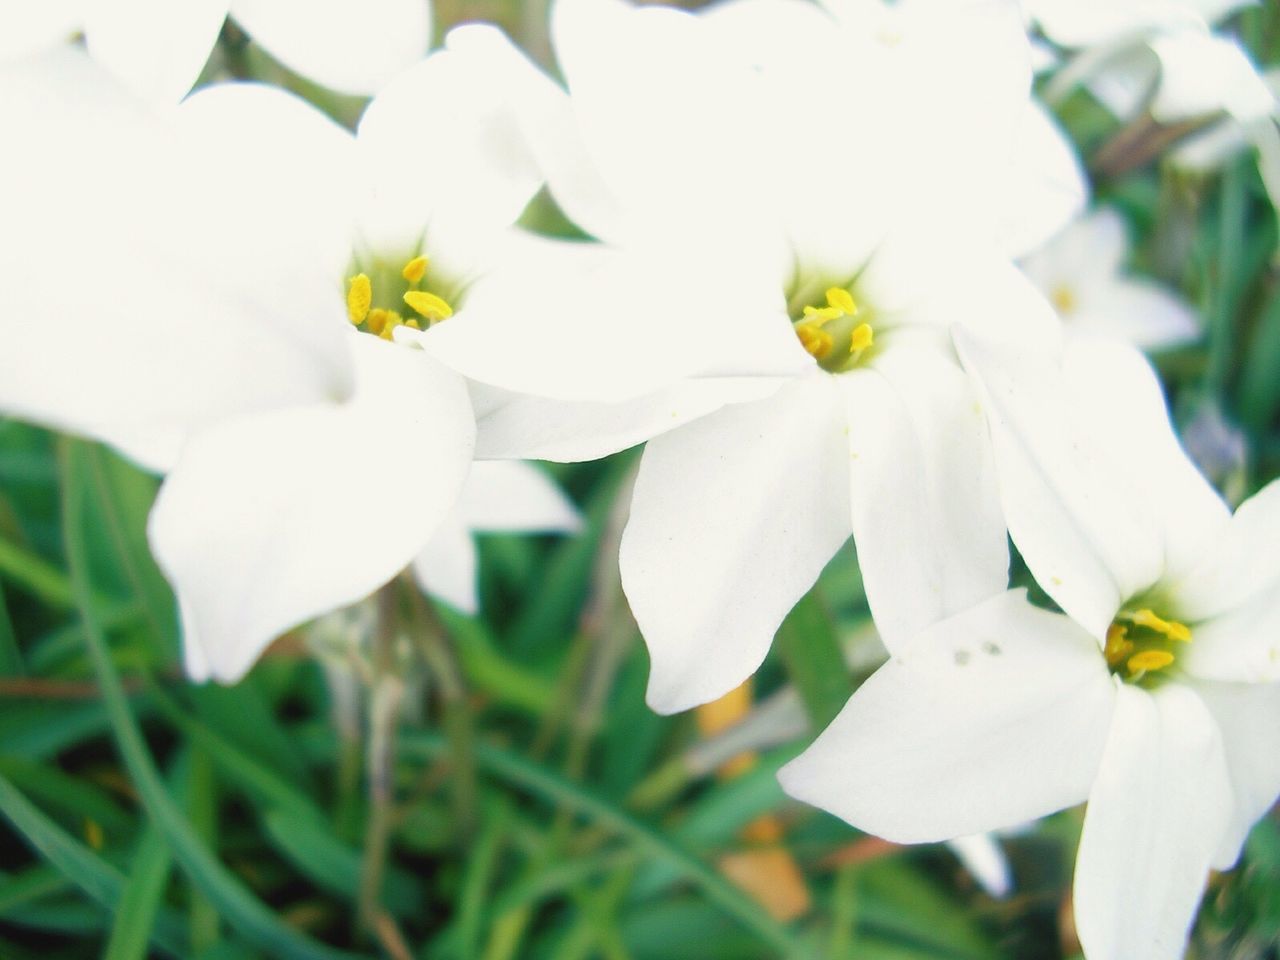 CLOSE-UP OF FRESH WHITE FLOWERS BLOOMING IN NATURE